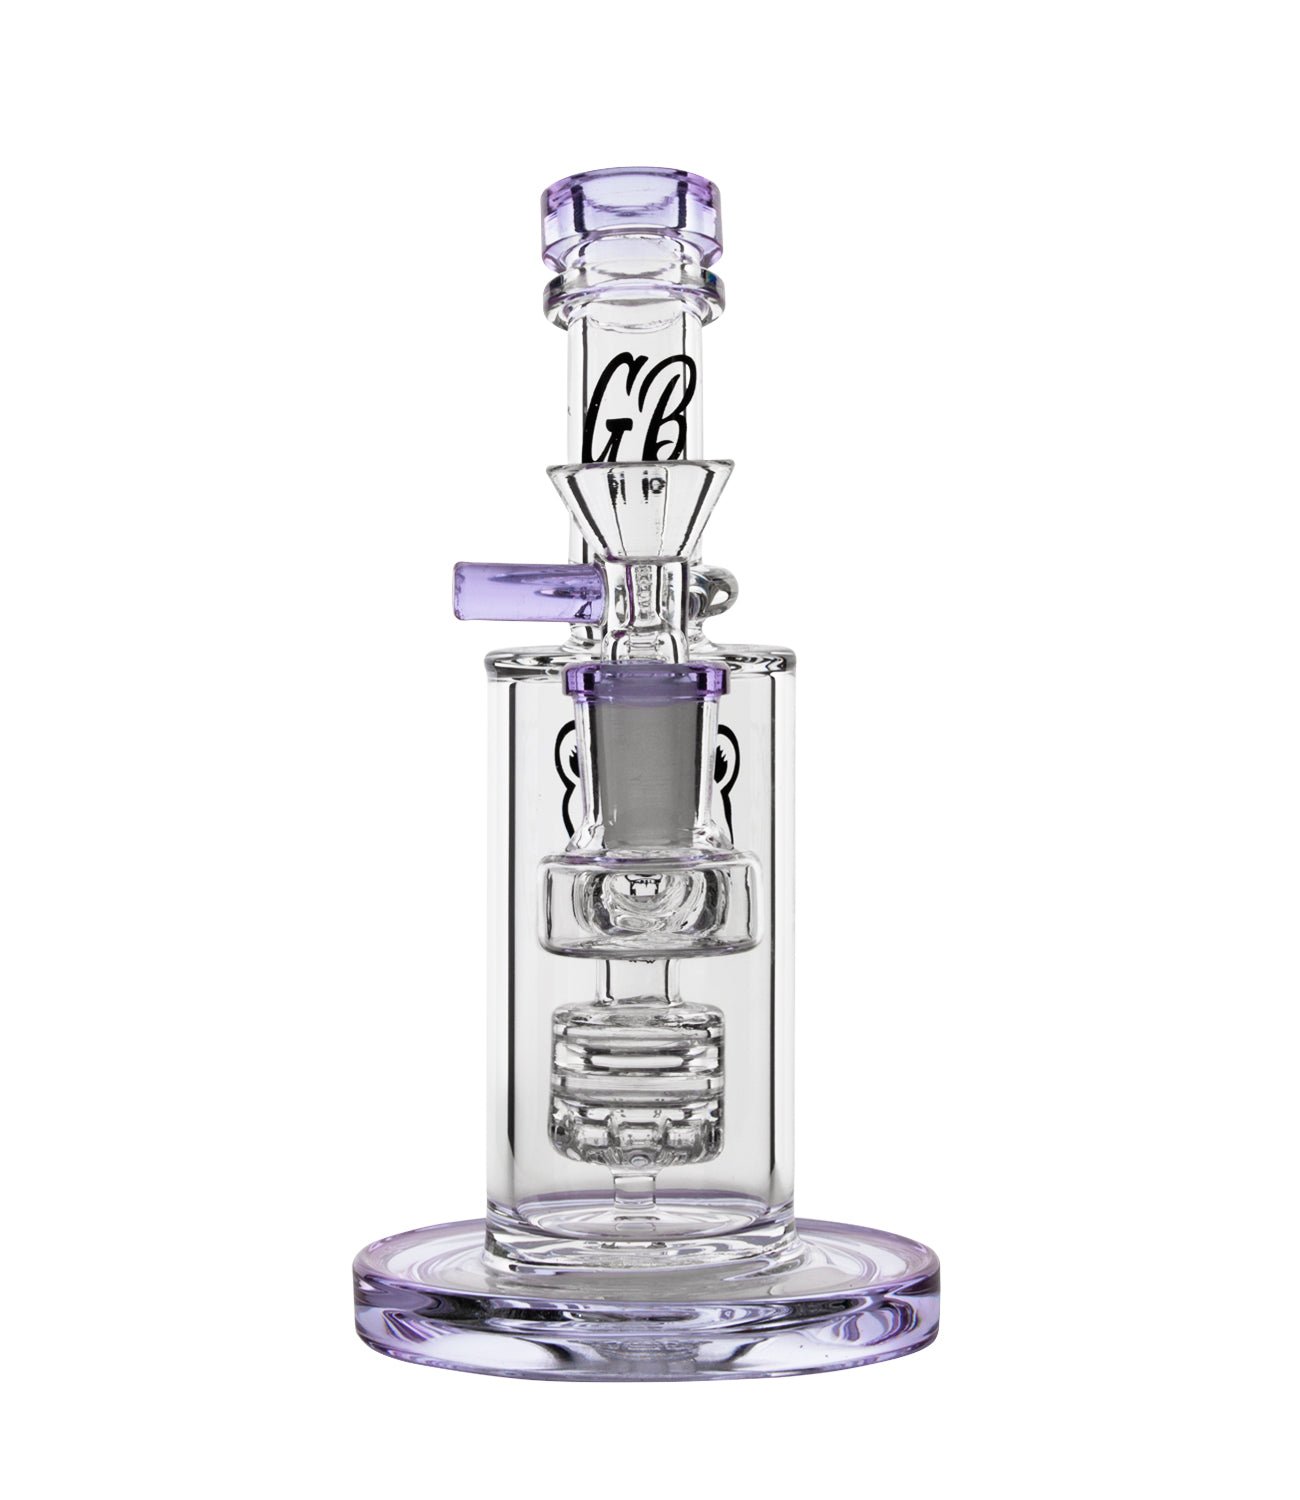 Green Bear Barrel Dab Rig | Third Party Brands | 420 Science